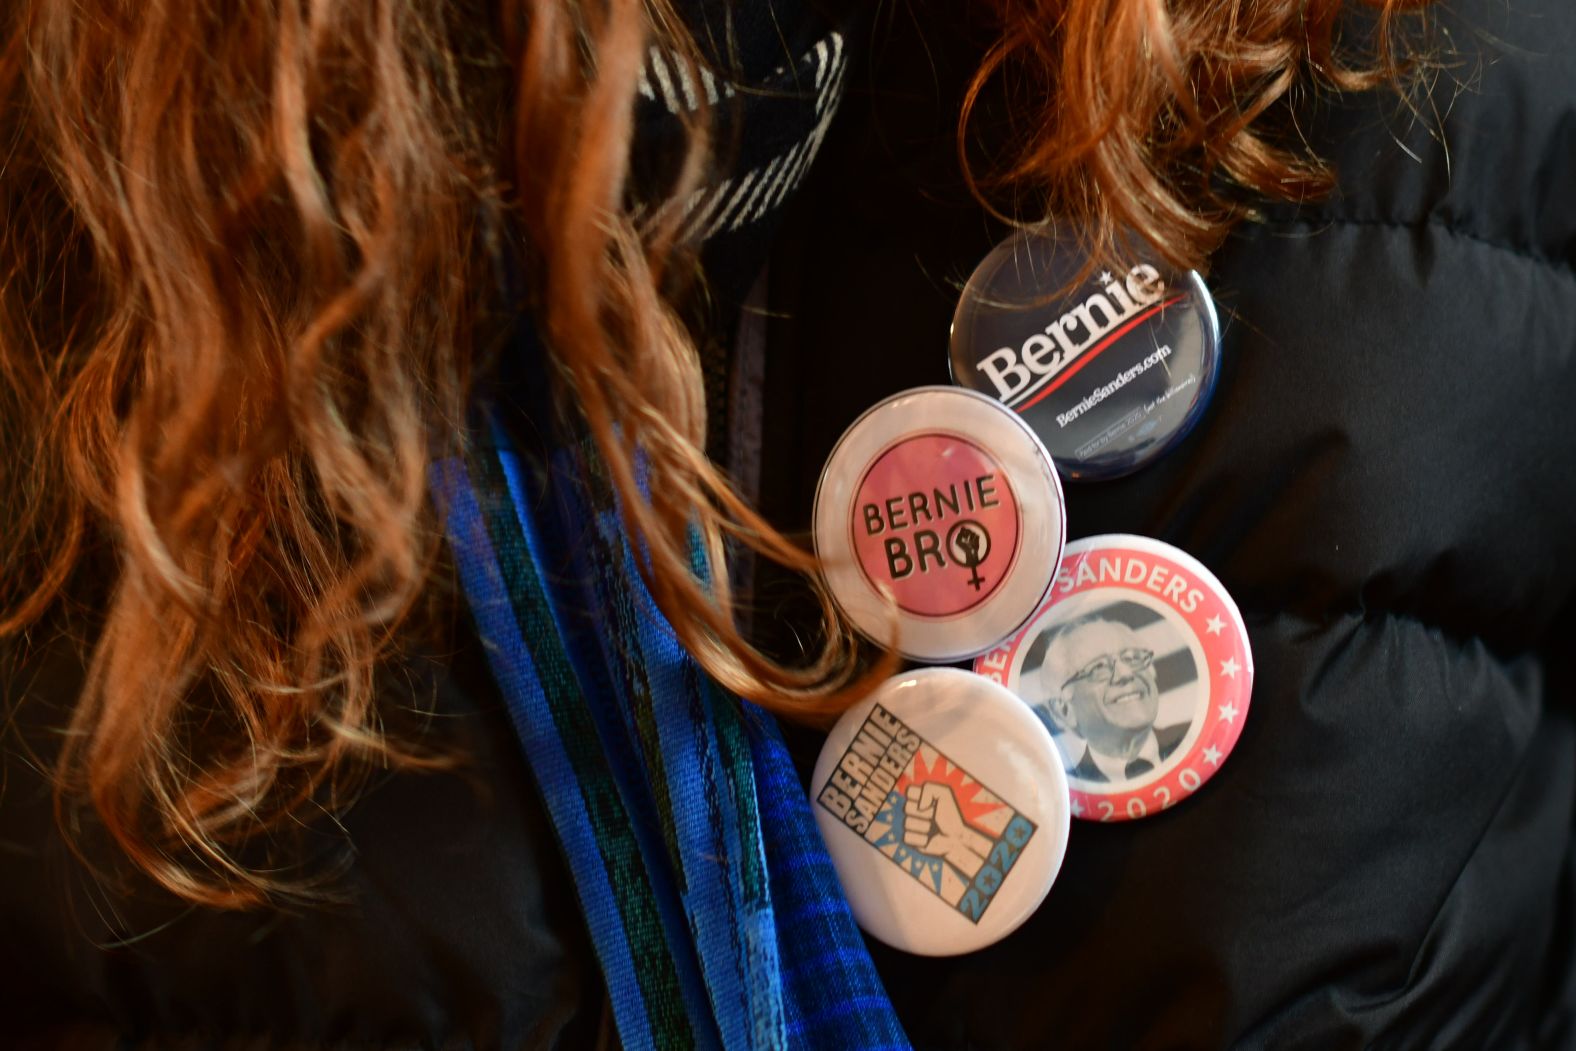 A volunteer wears Sanders campaign pins during an event in Waterloo on February 1.